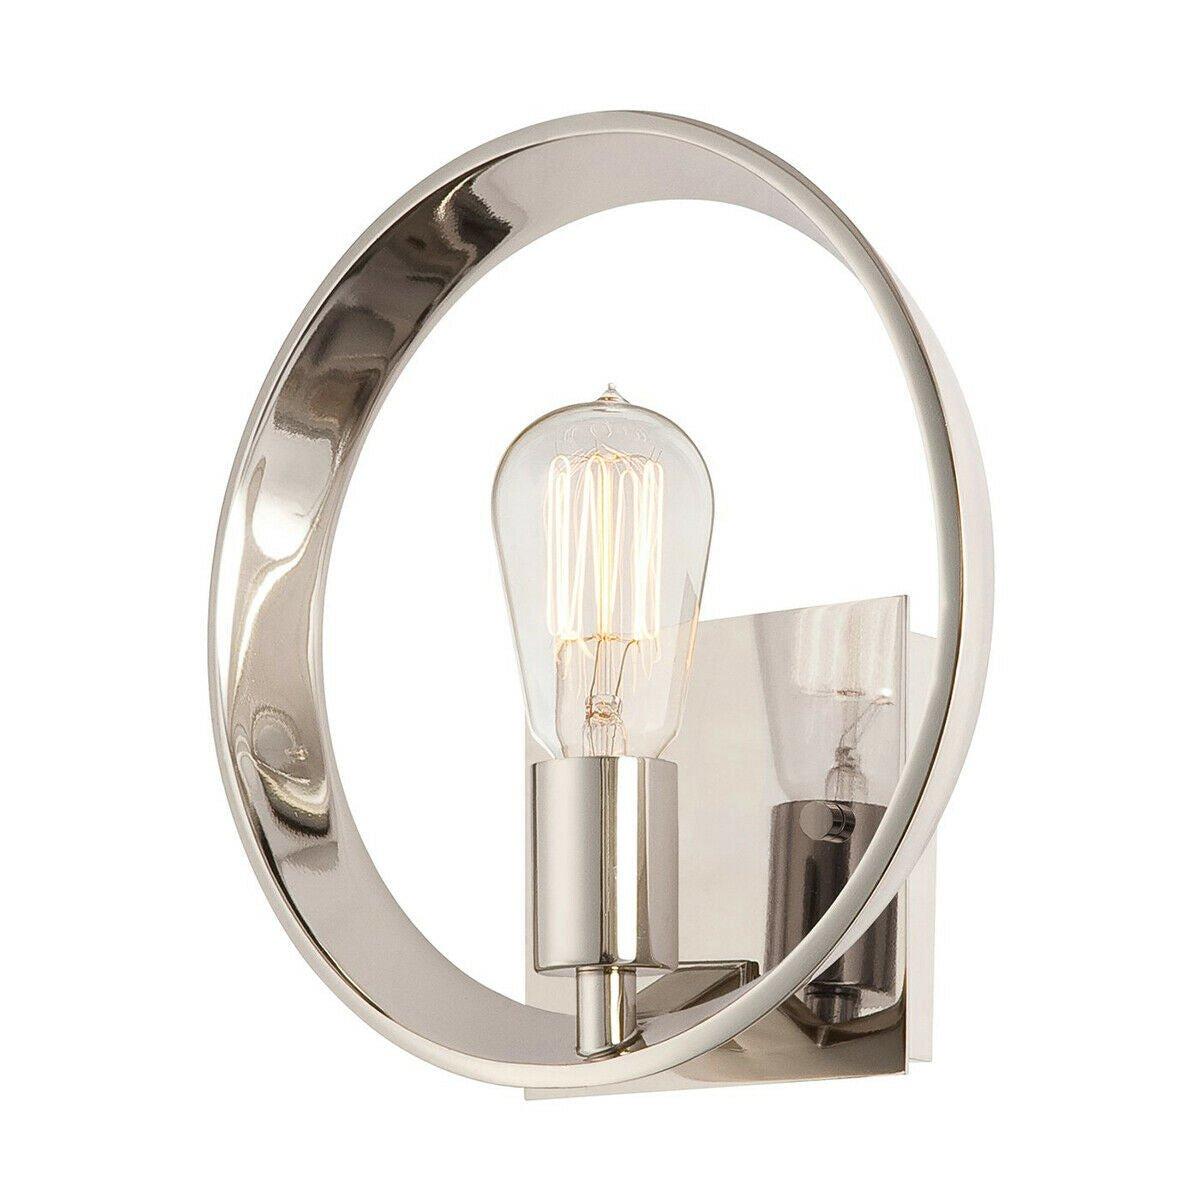 Wall Light Imperial Silver Finished Design Exposeding the Centre LED E27 60W